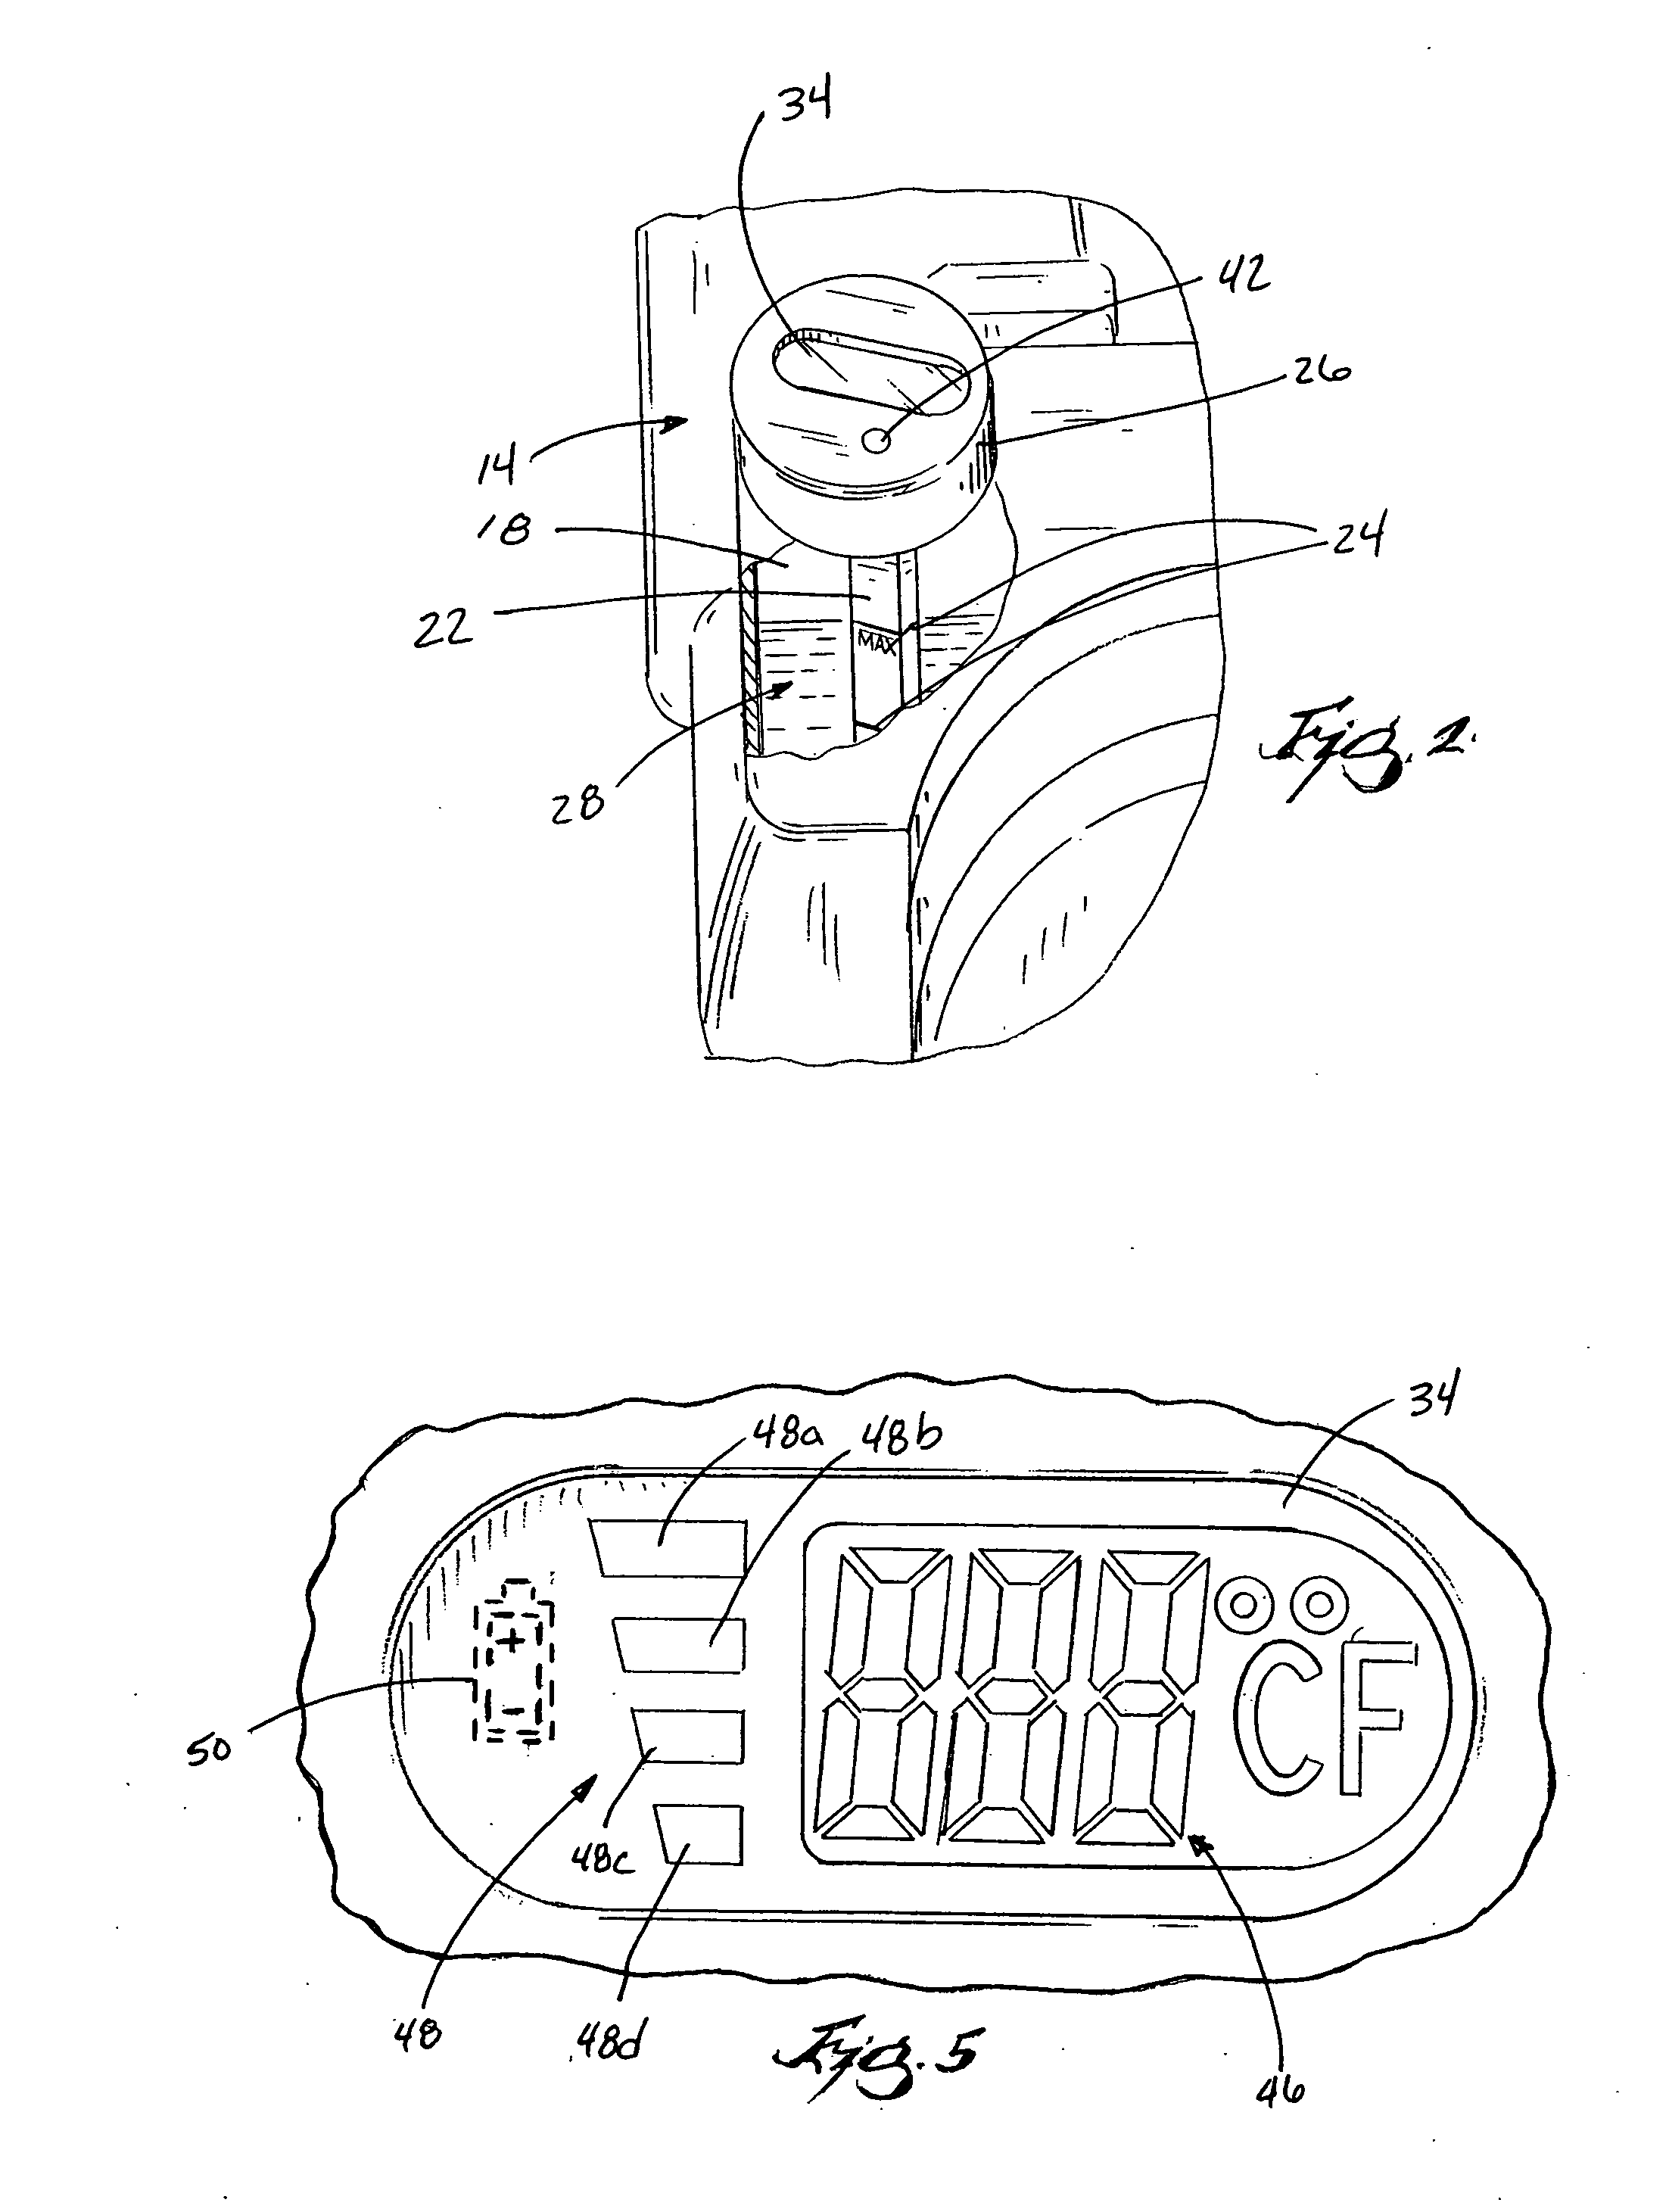 Apparatus for indicating oil temperature and oil level within an oil reservoir